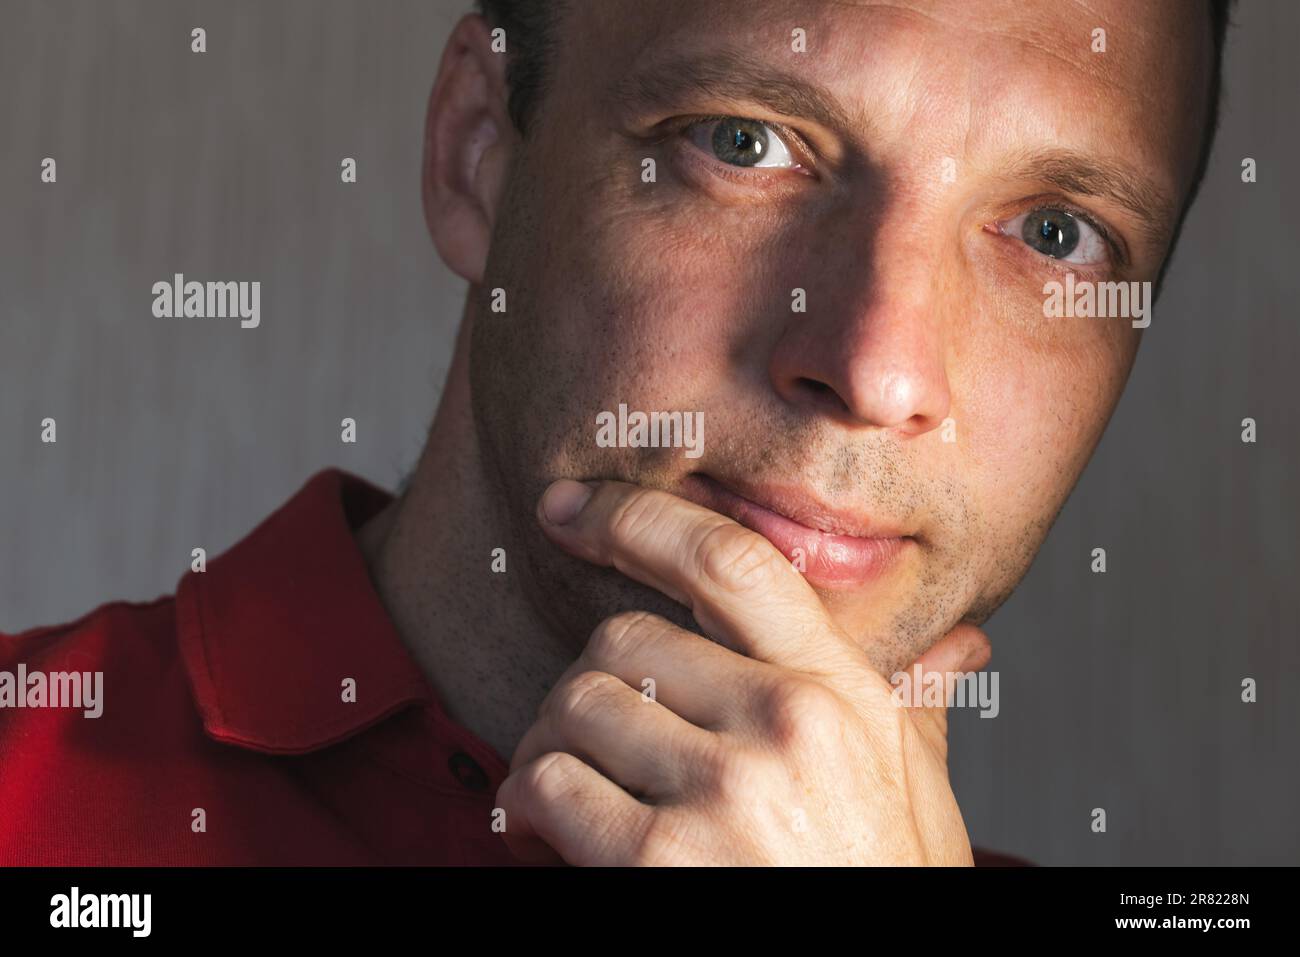 Face portrait of positive young adult Caucasian man, studio photo with selective soft focus Stock Photo